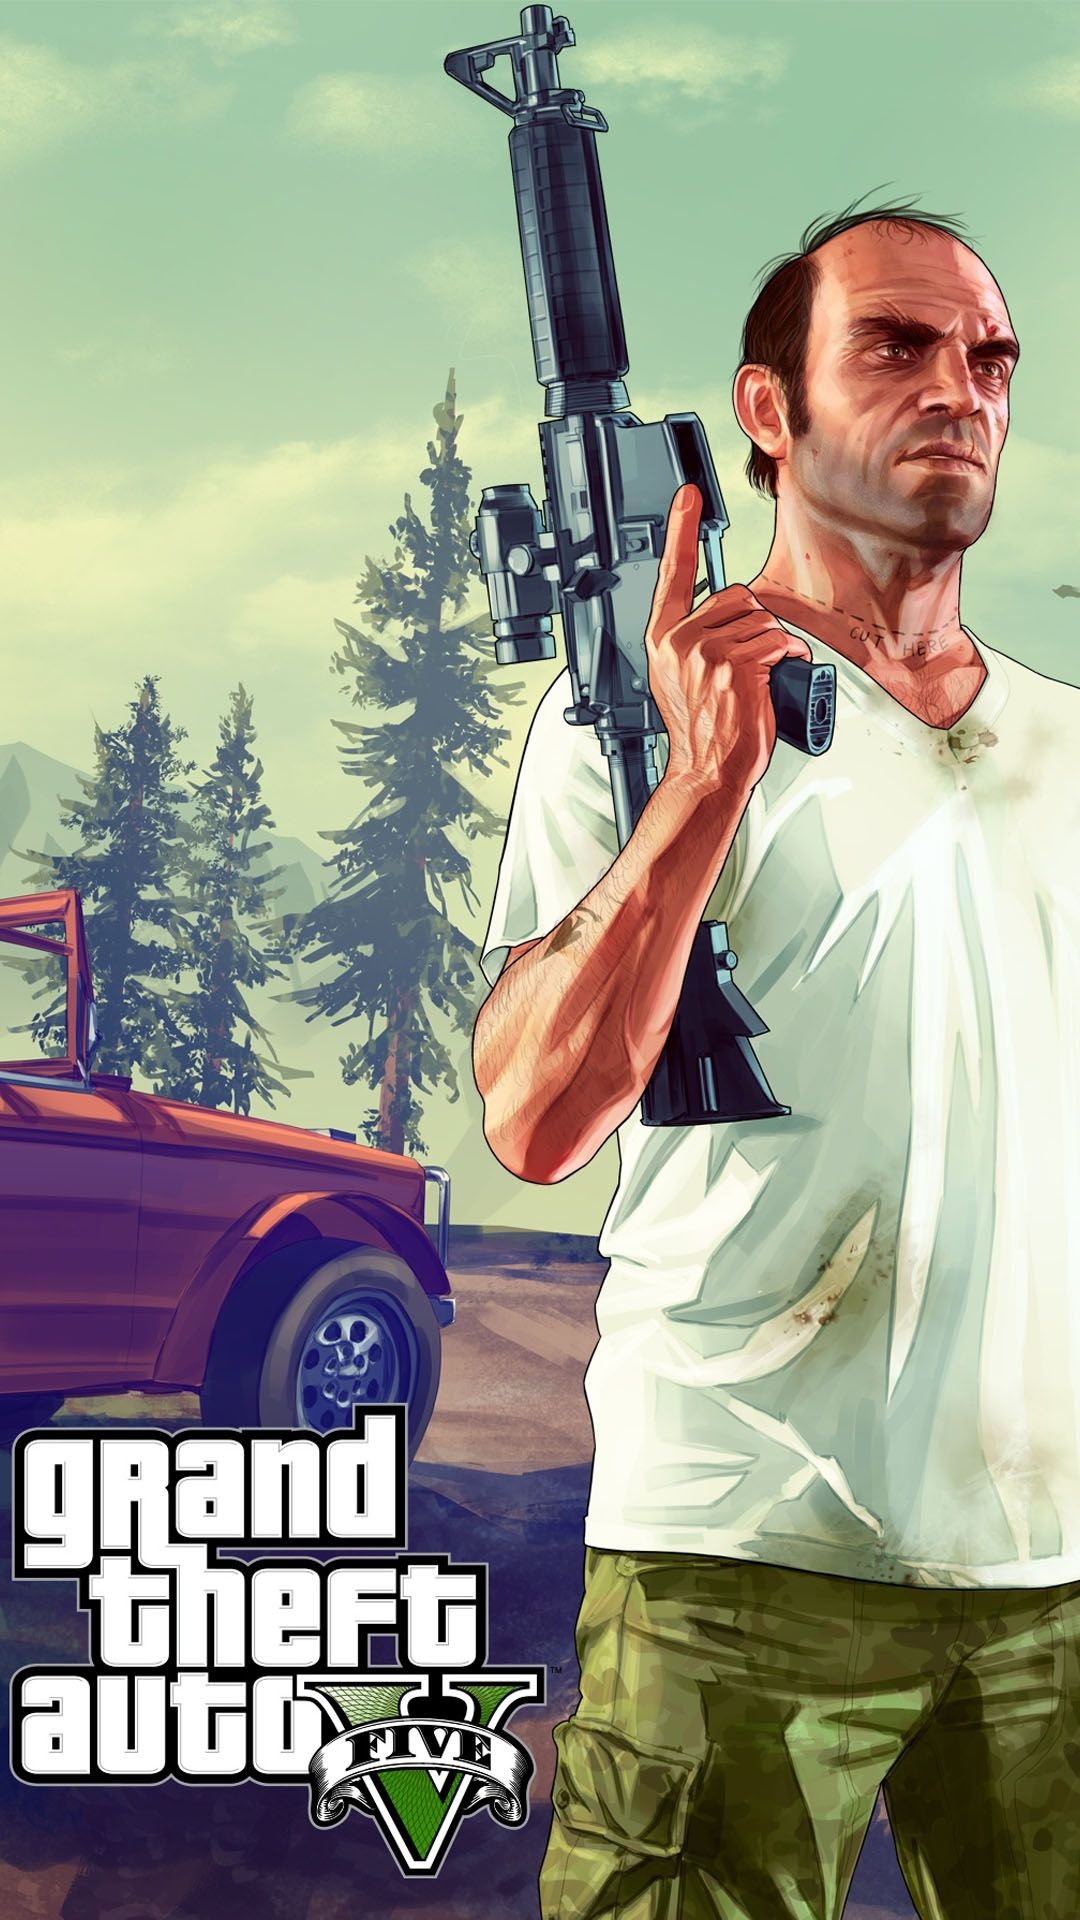 Grand Theft Auto, GTA 4K wallpapers, Free download, 1080x1920 Full HD Phone